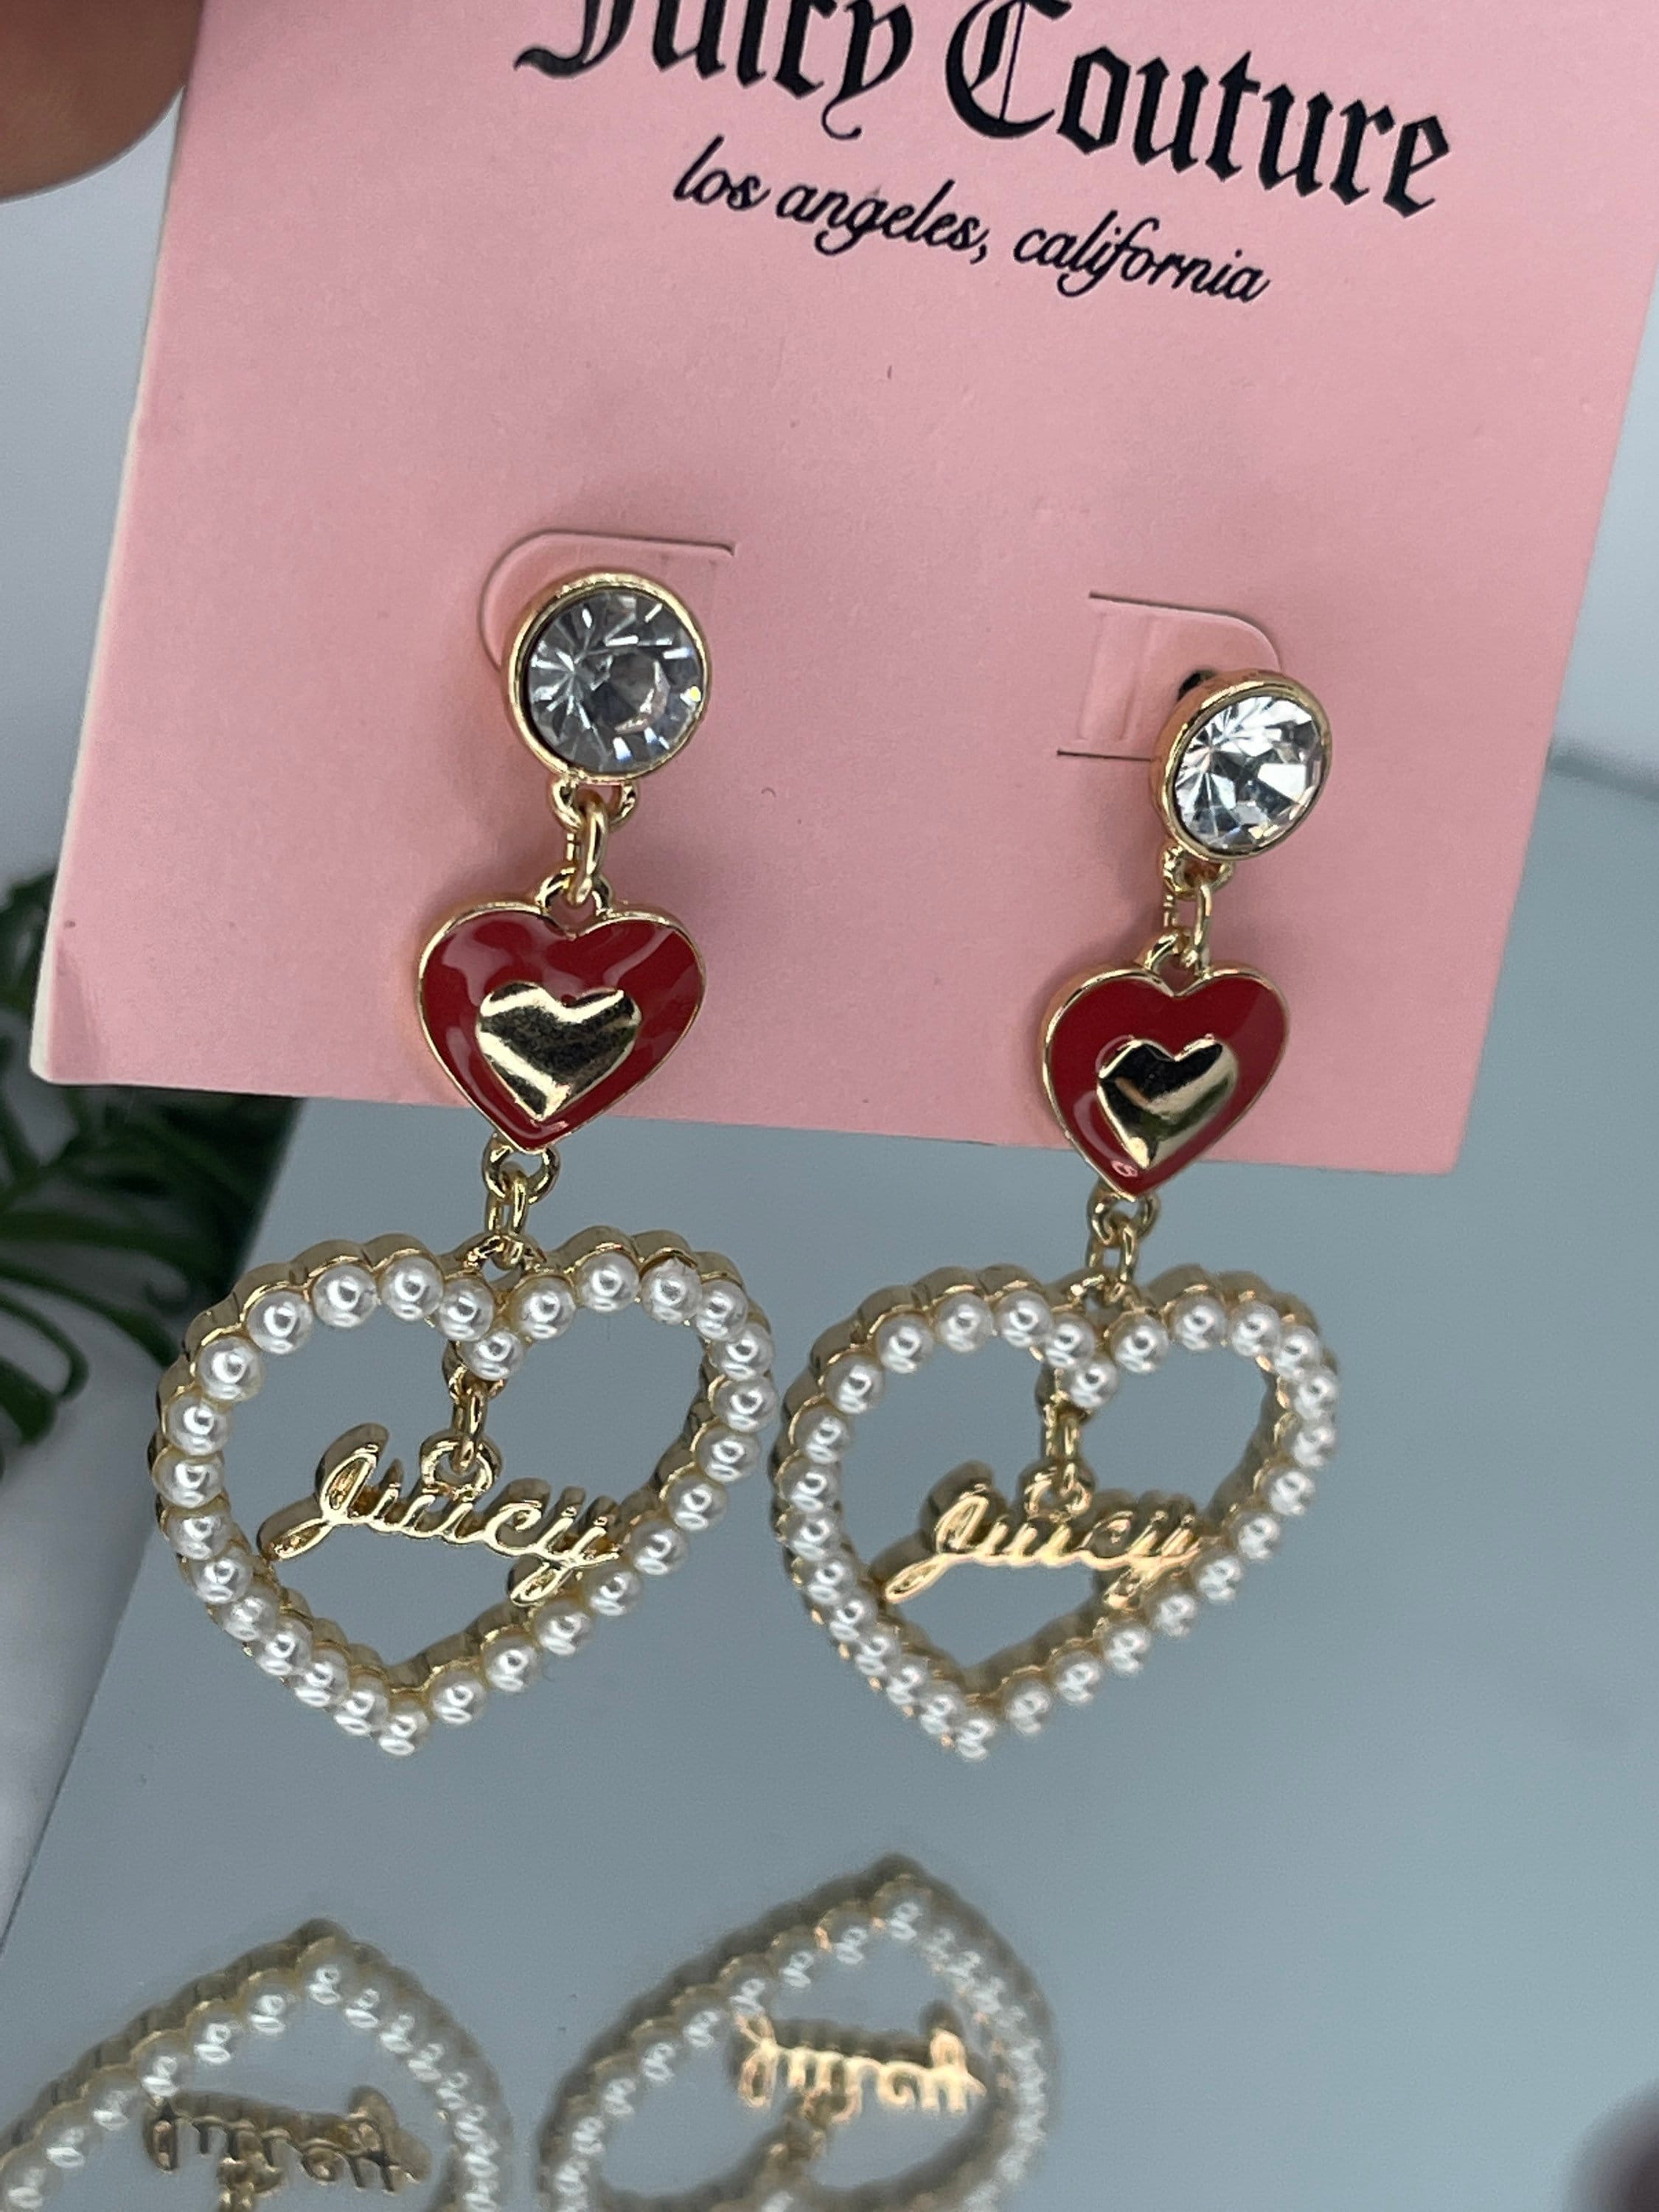 Juicy Couture Official Heart Charm Earrings Red Heart Charm Pearl Color  Jewelry Gift for Mom Boho Chic Jewelry 